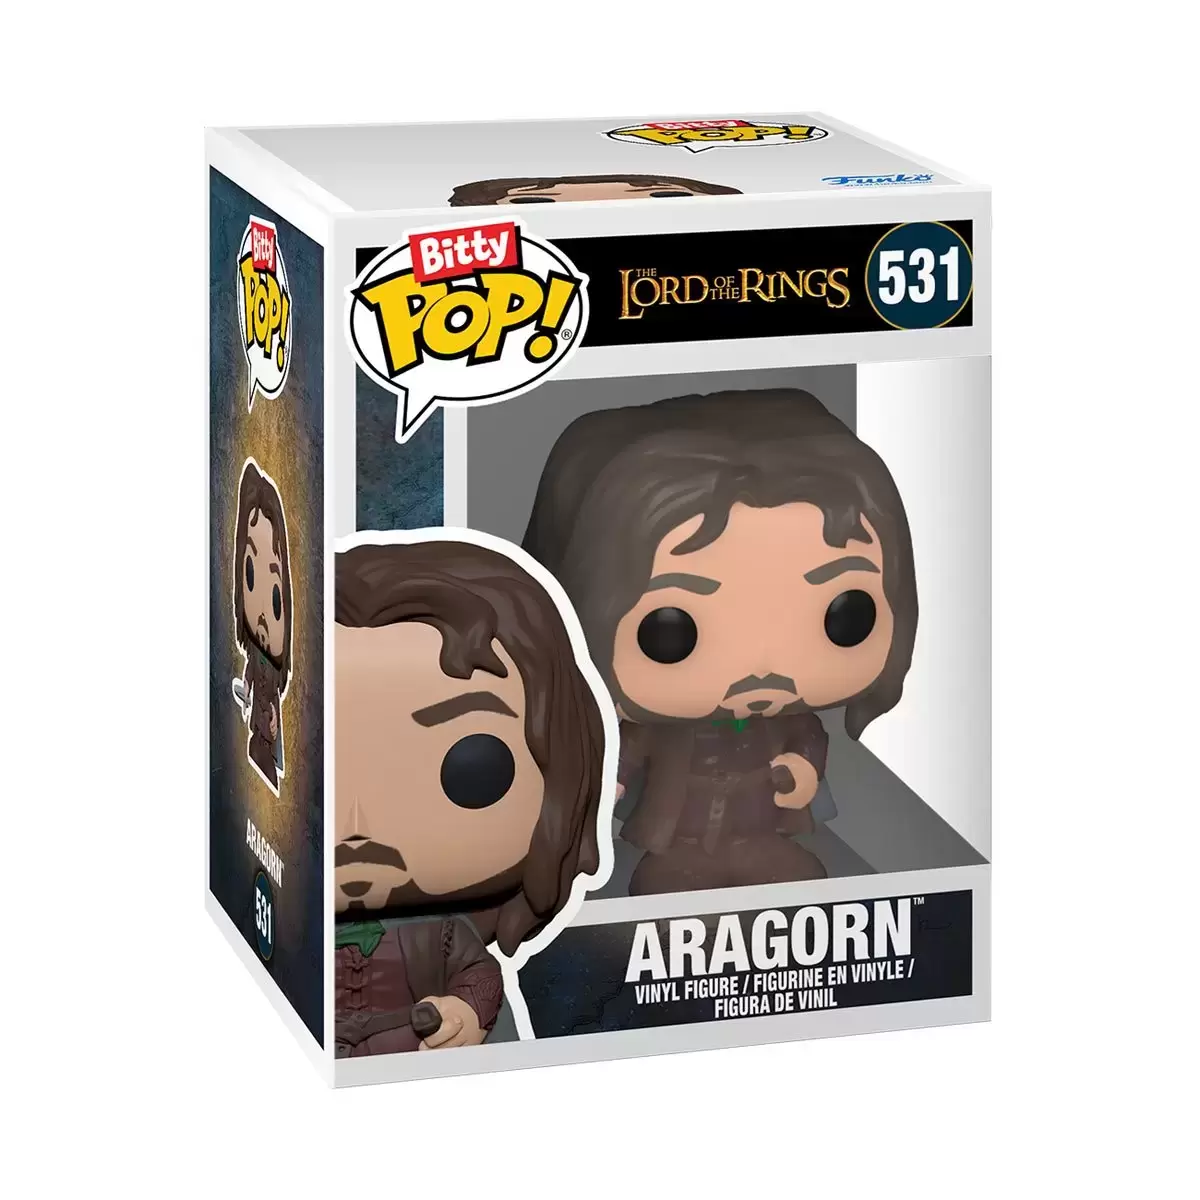 Bitty POP! - Lord of The Rings - Aragorn